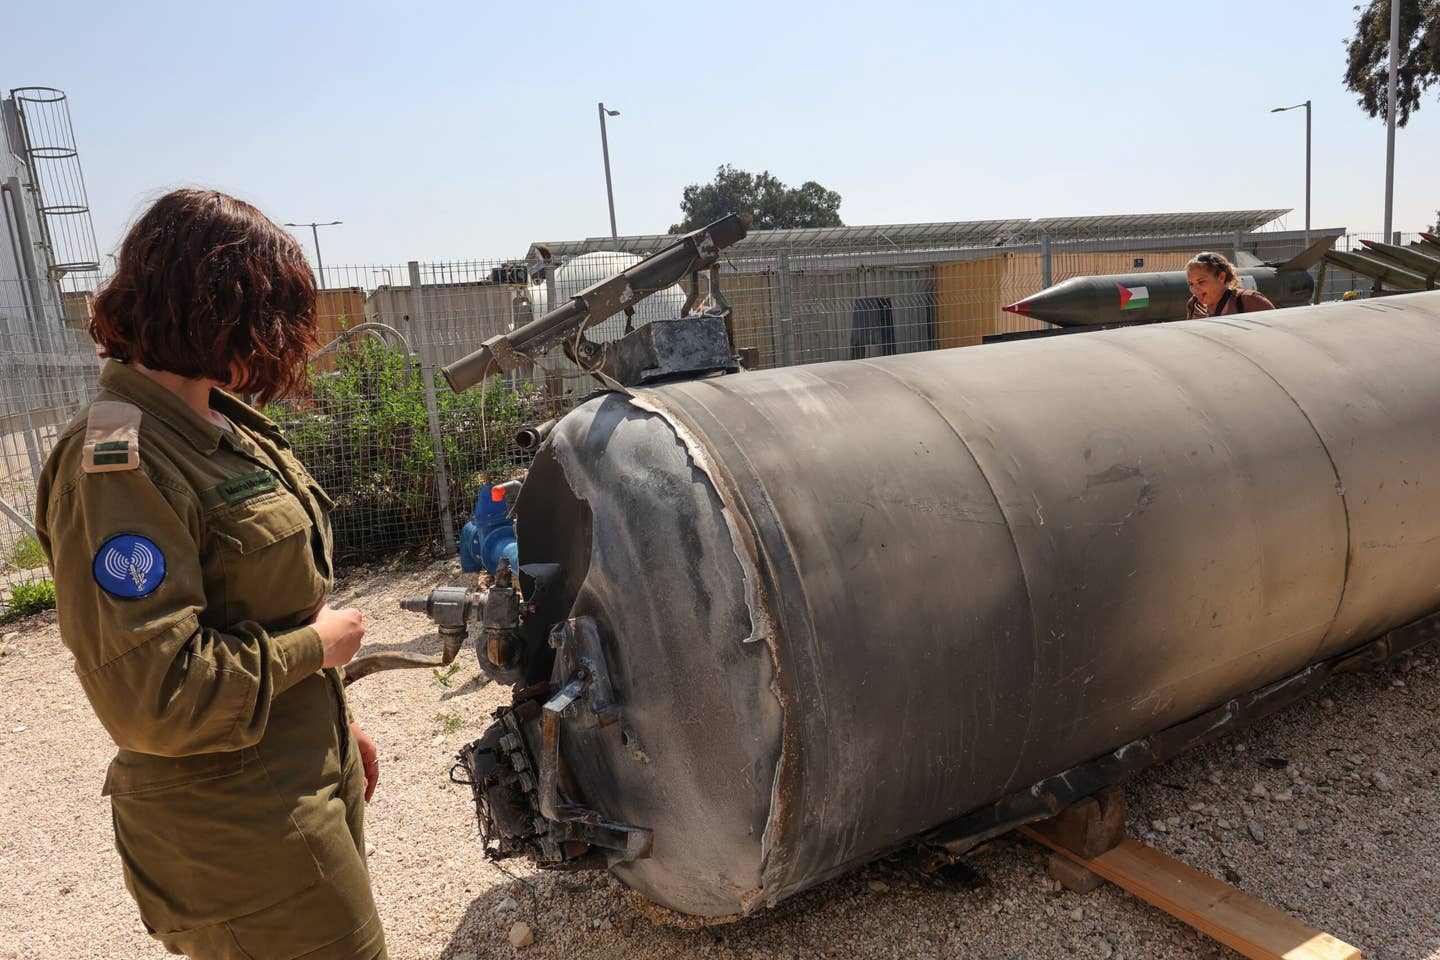 A member of the Israeli military stands next to an Iranian ballistic missile which fell in Israel on the weekend, during a media tour at the Julis military base near the southern Israeli city of Kiryat Malachi on April 16, 2024. <em>Photo by GIL COHEN-MAGEN/AFP via Getty Images</em>